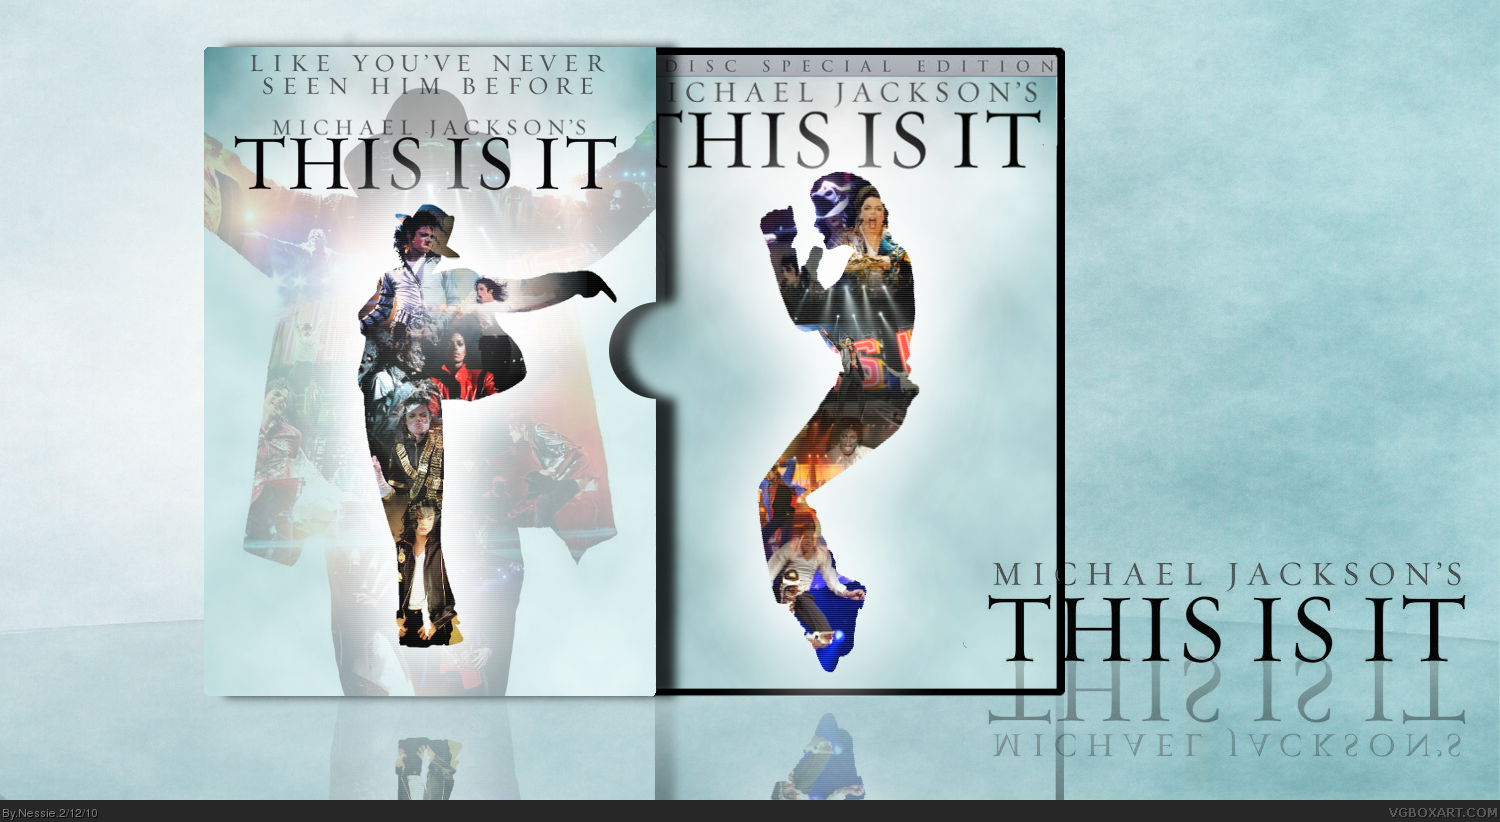 Michael Jackson's This Is It box cover